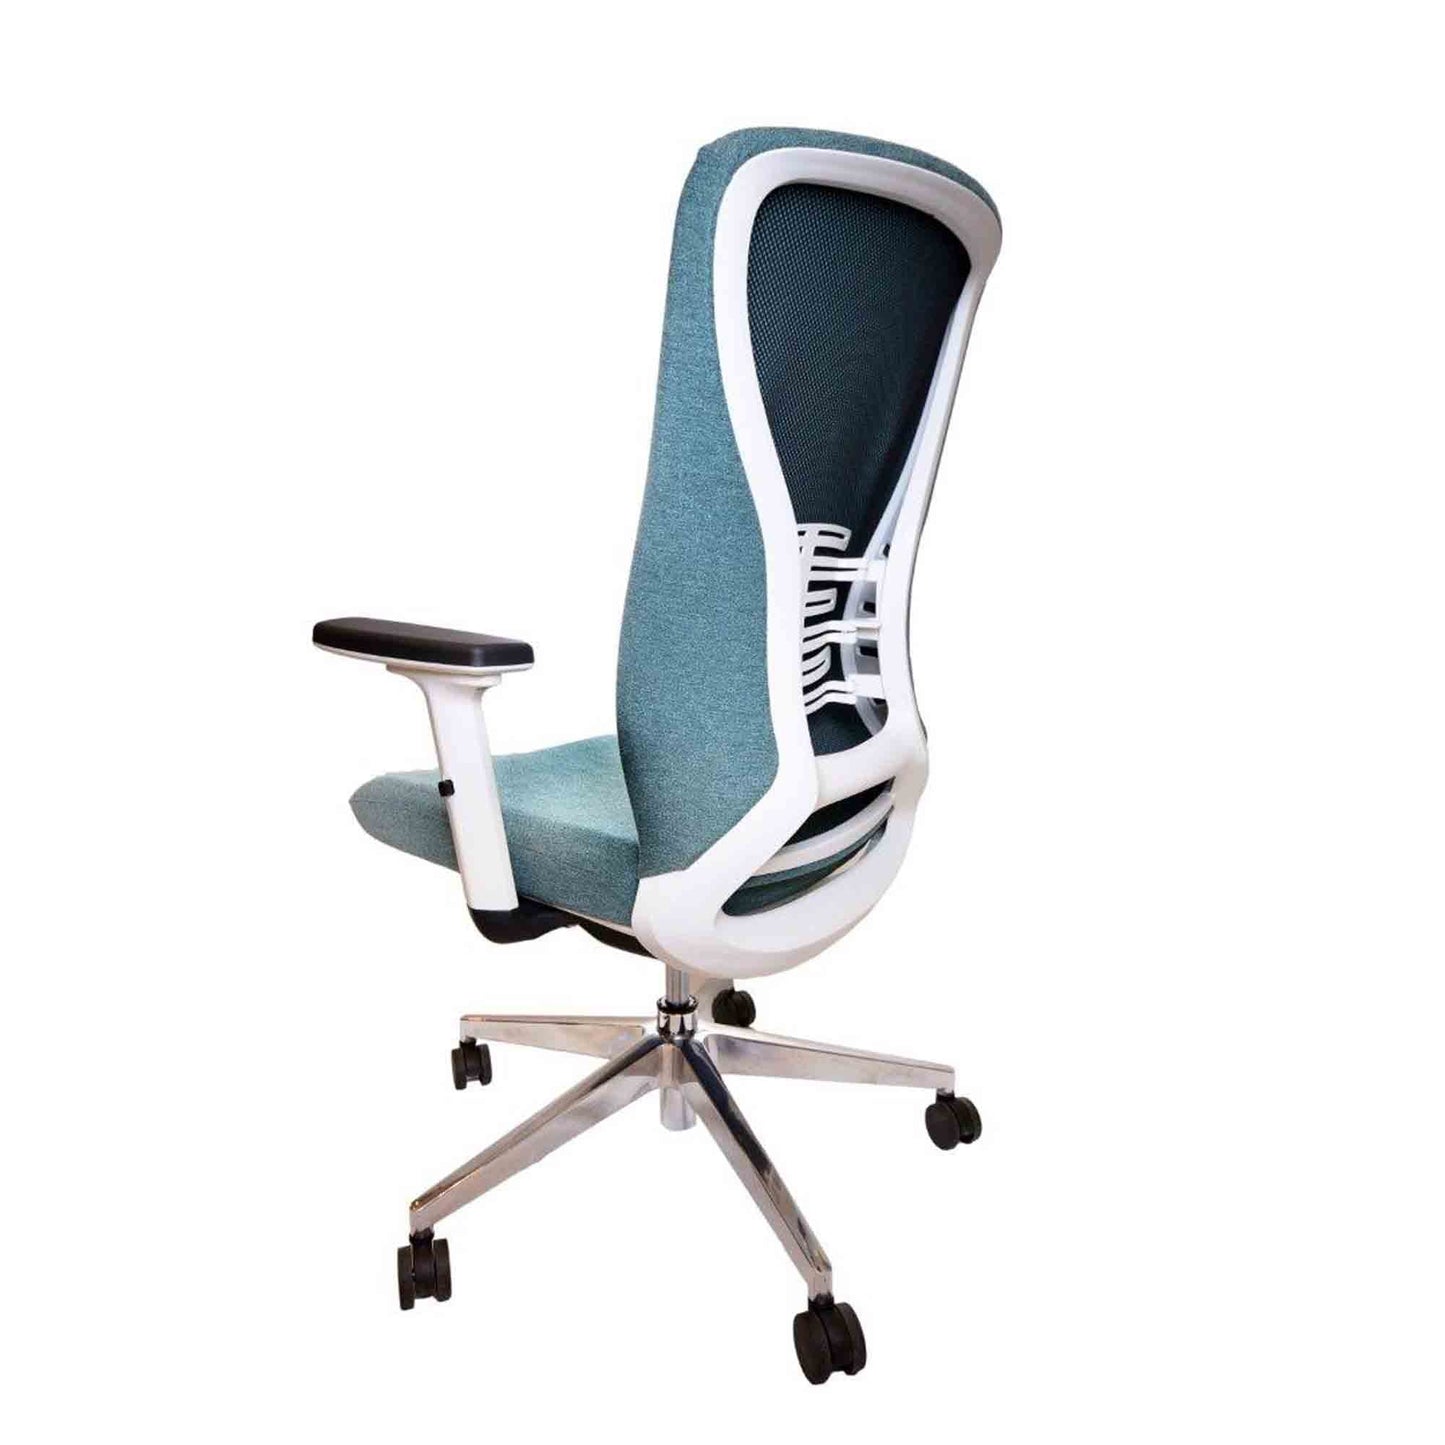 Office Chair - mch0029